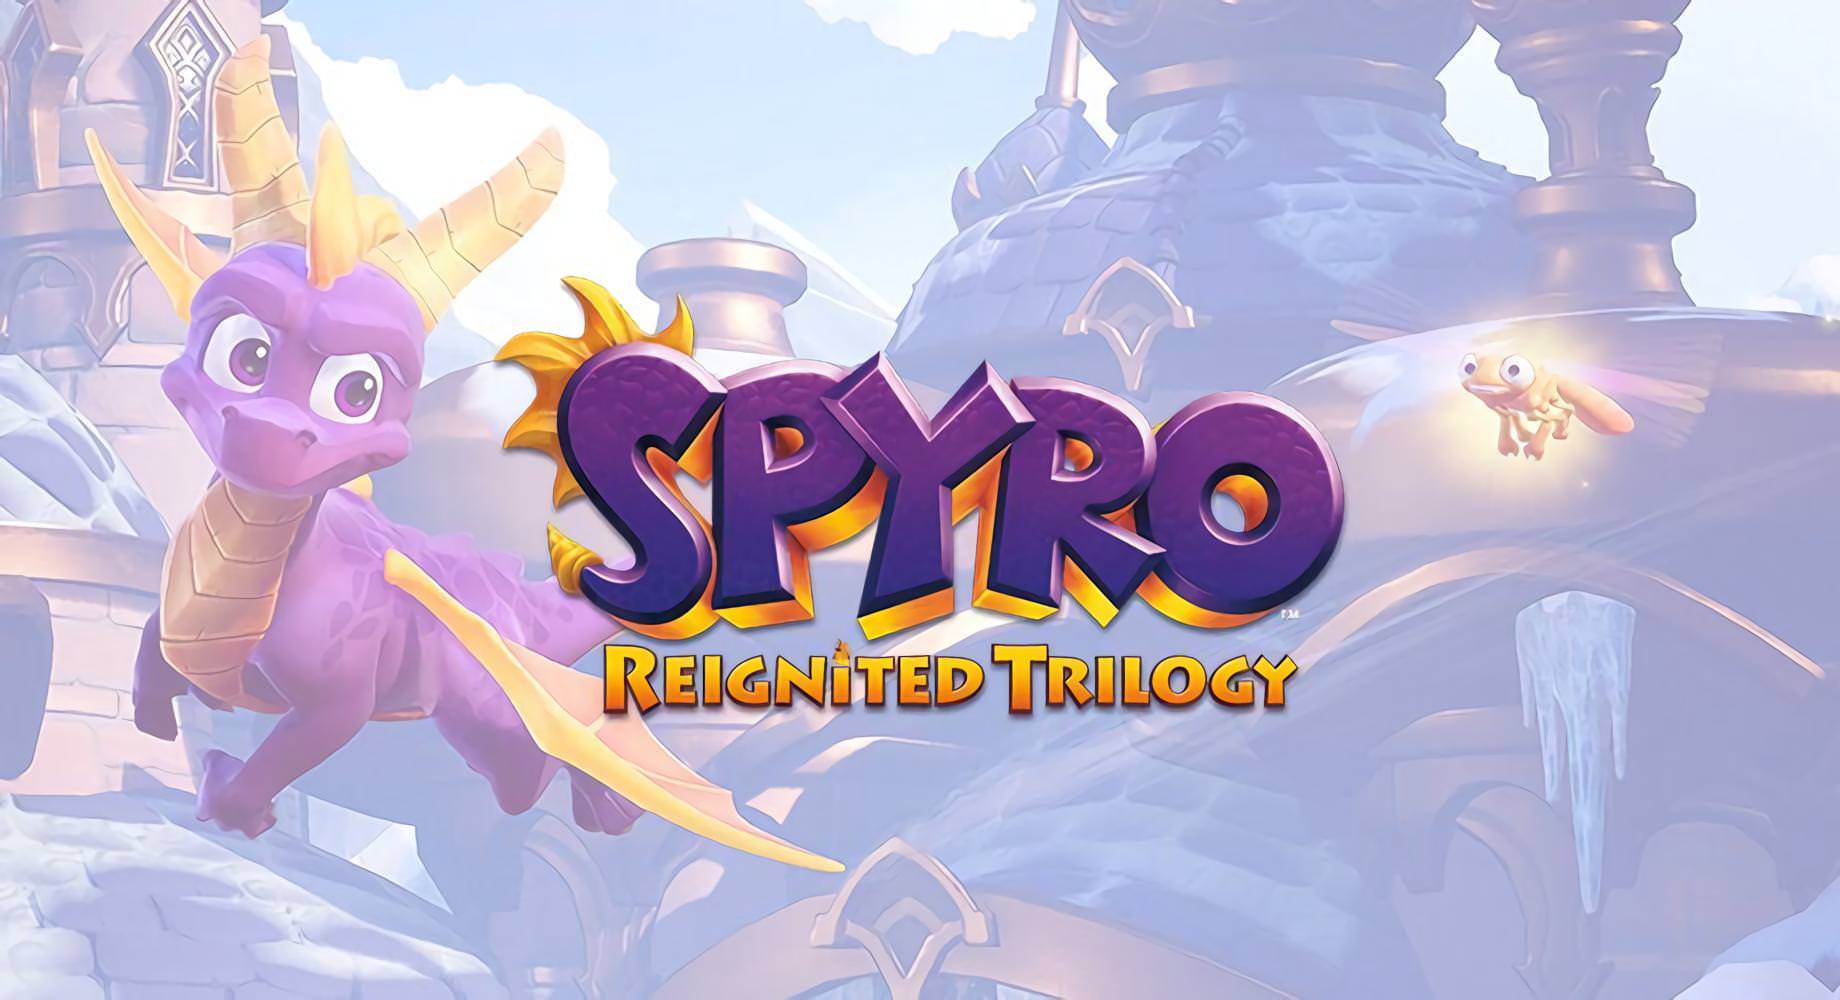 Spyro Reignited Trilogy Announced With